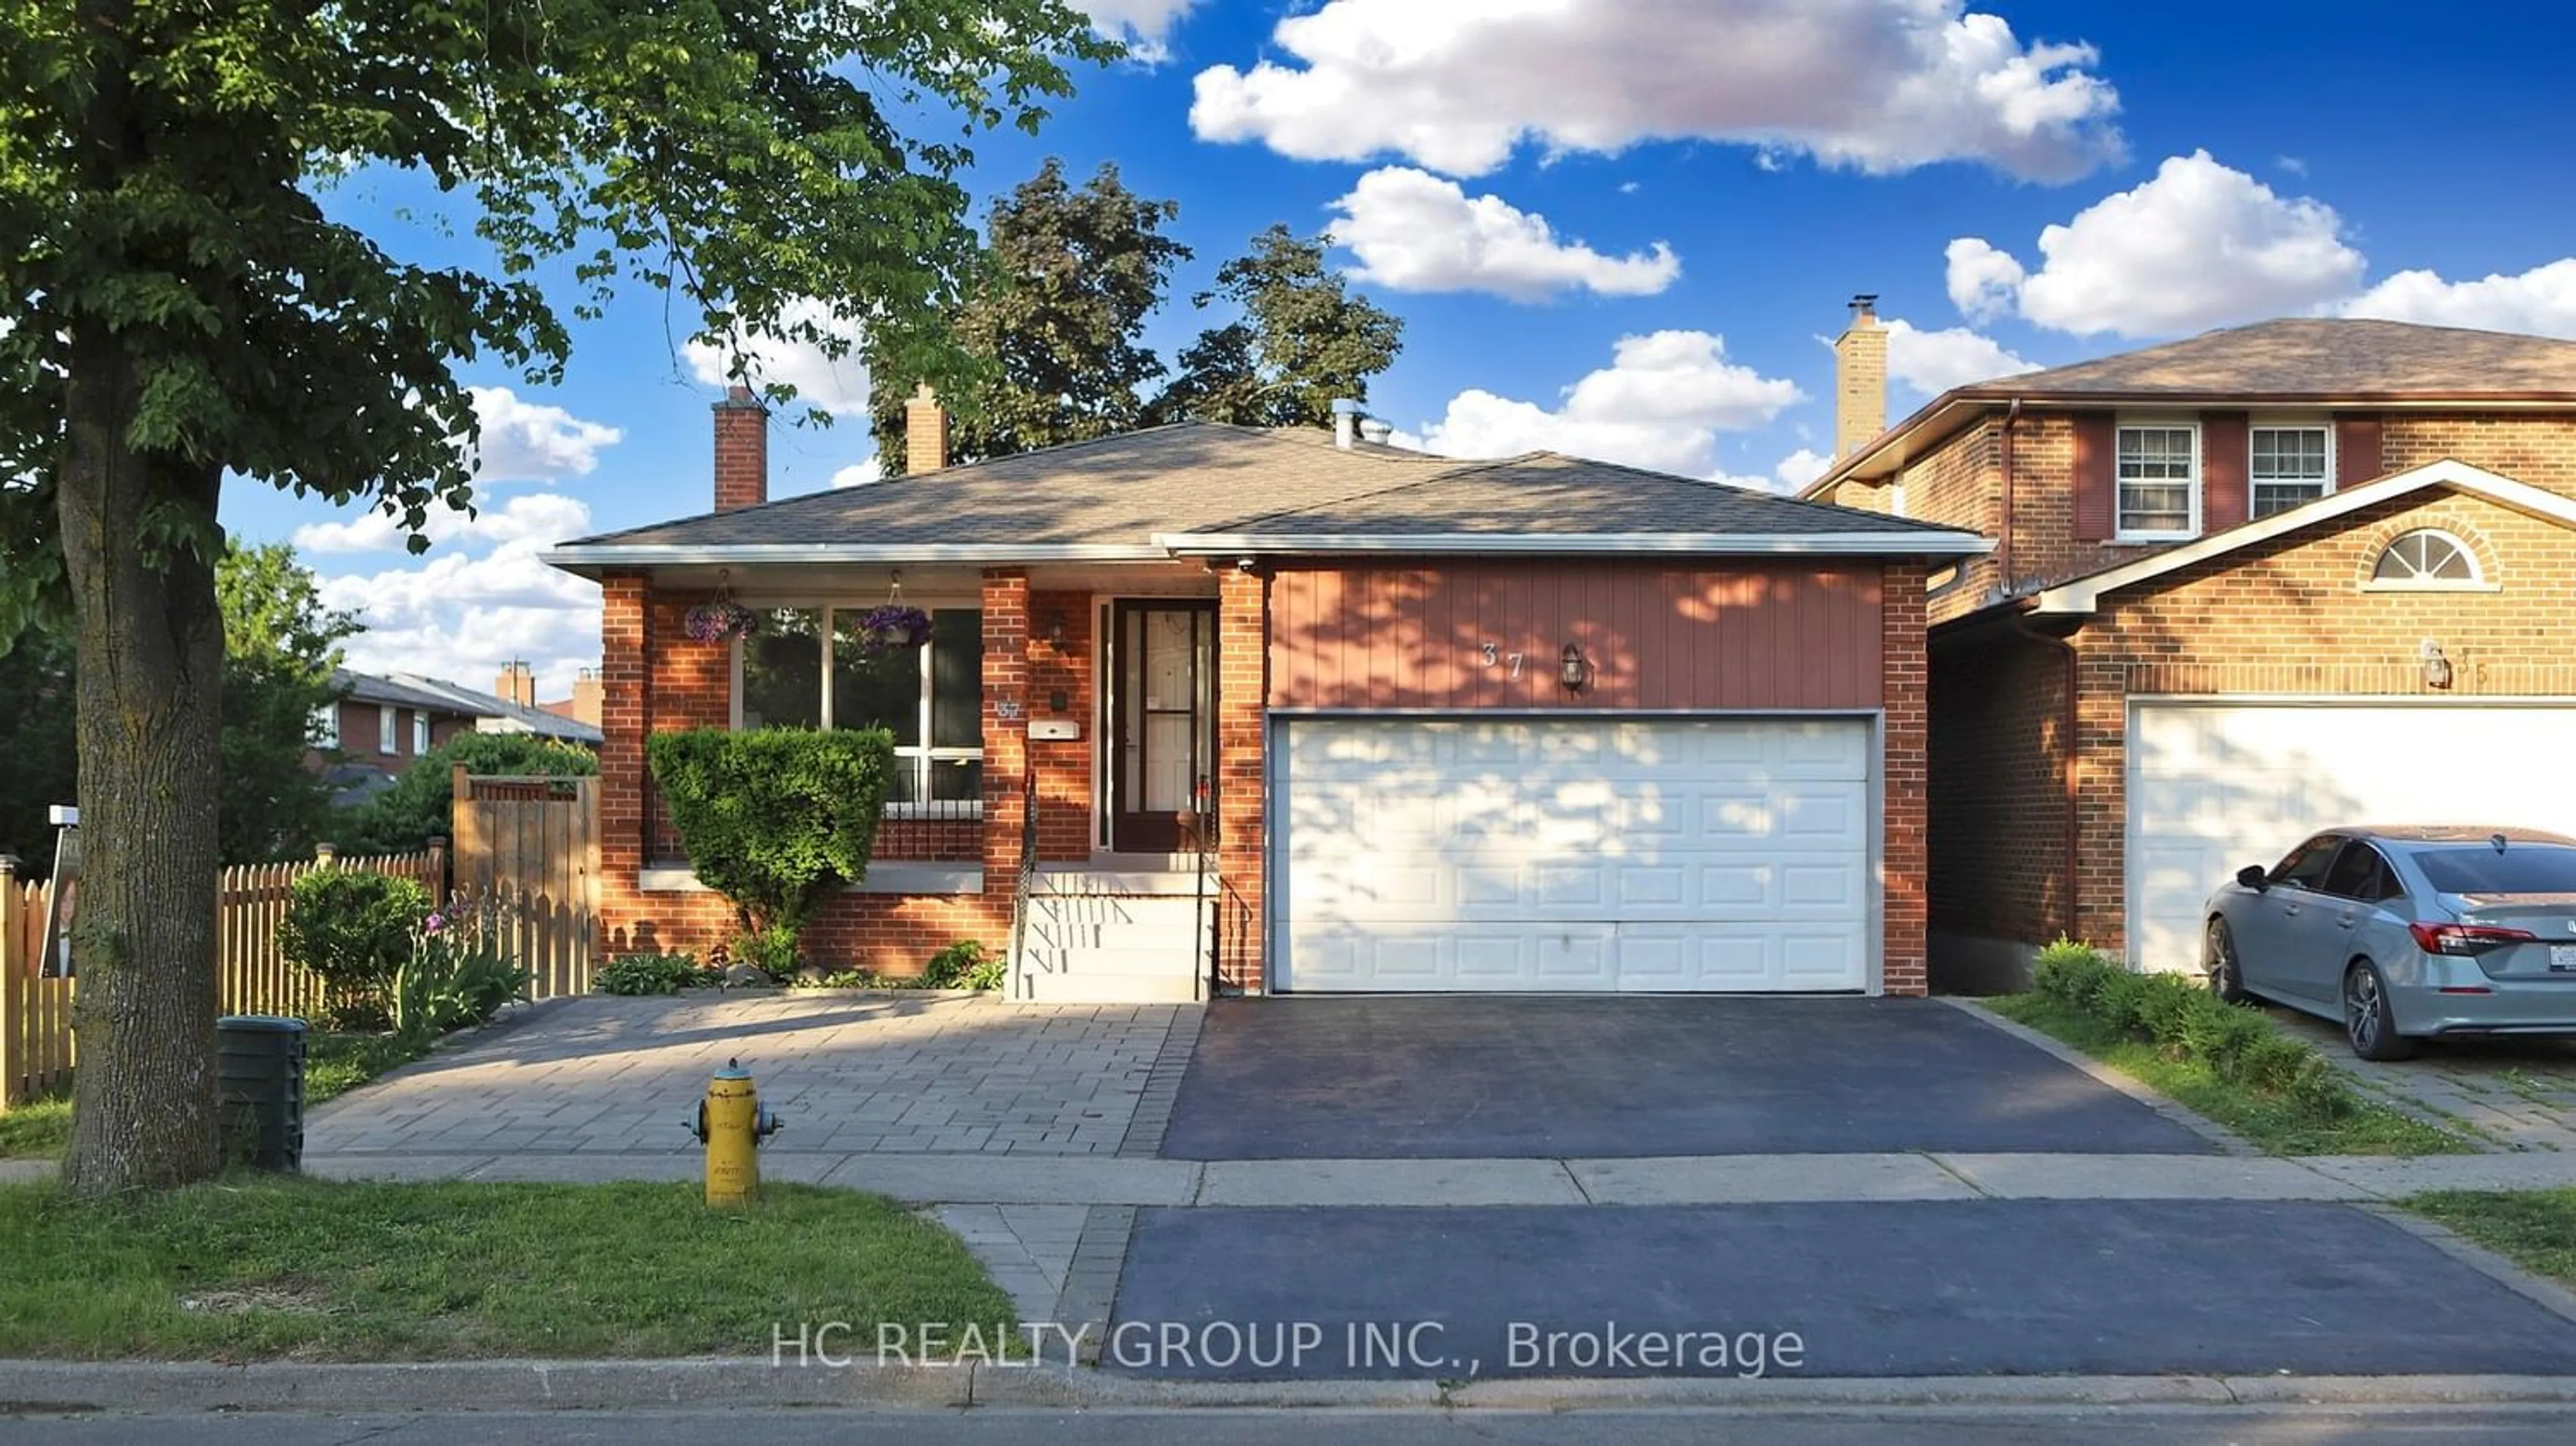 Home with brick exterior material for 37 Whistling Hills Dr, Toronto Ontario M1V 2B6